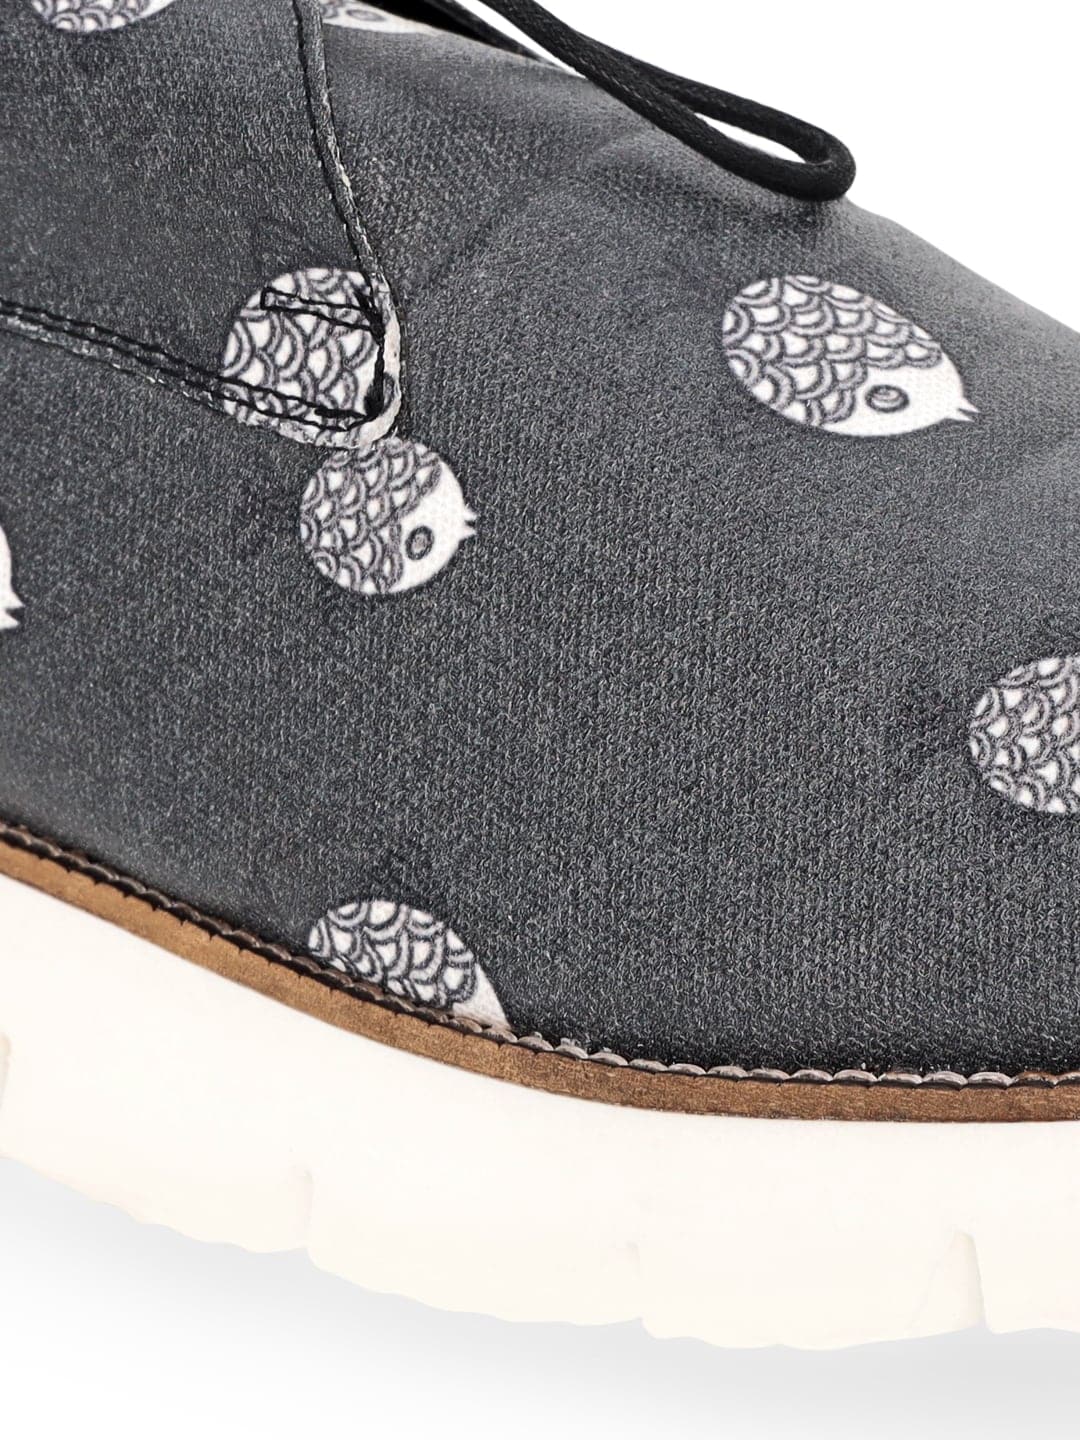 Moonlight Lace Up Casual Derby Boots